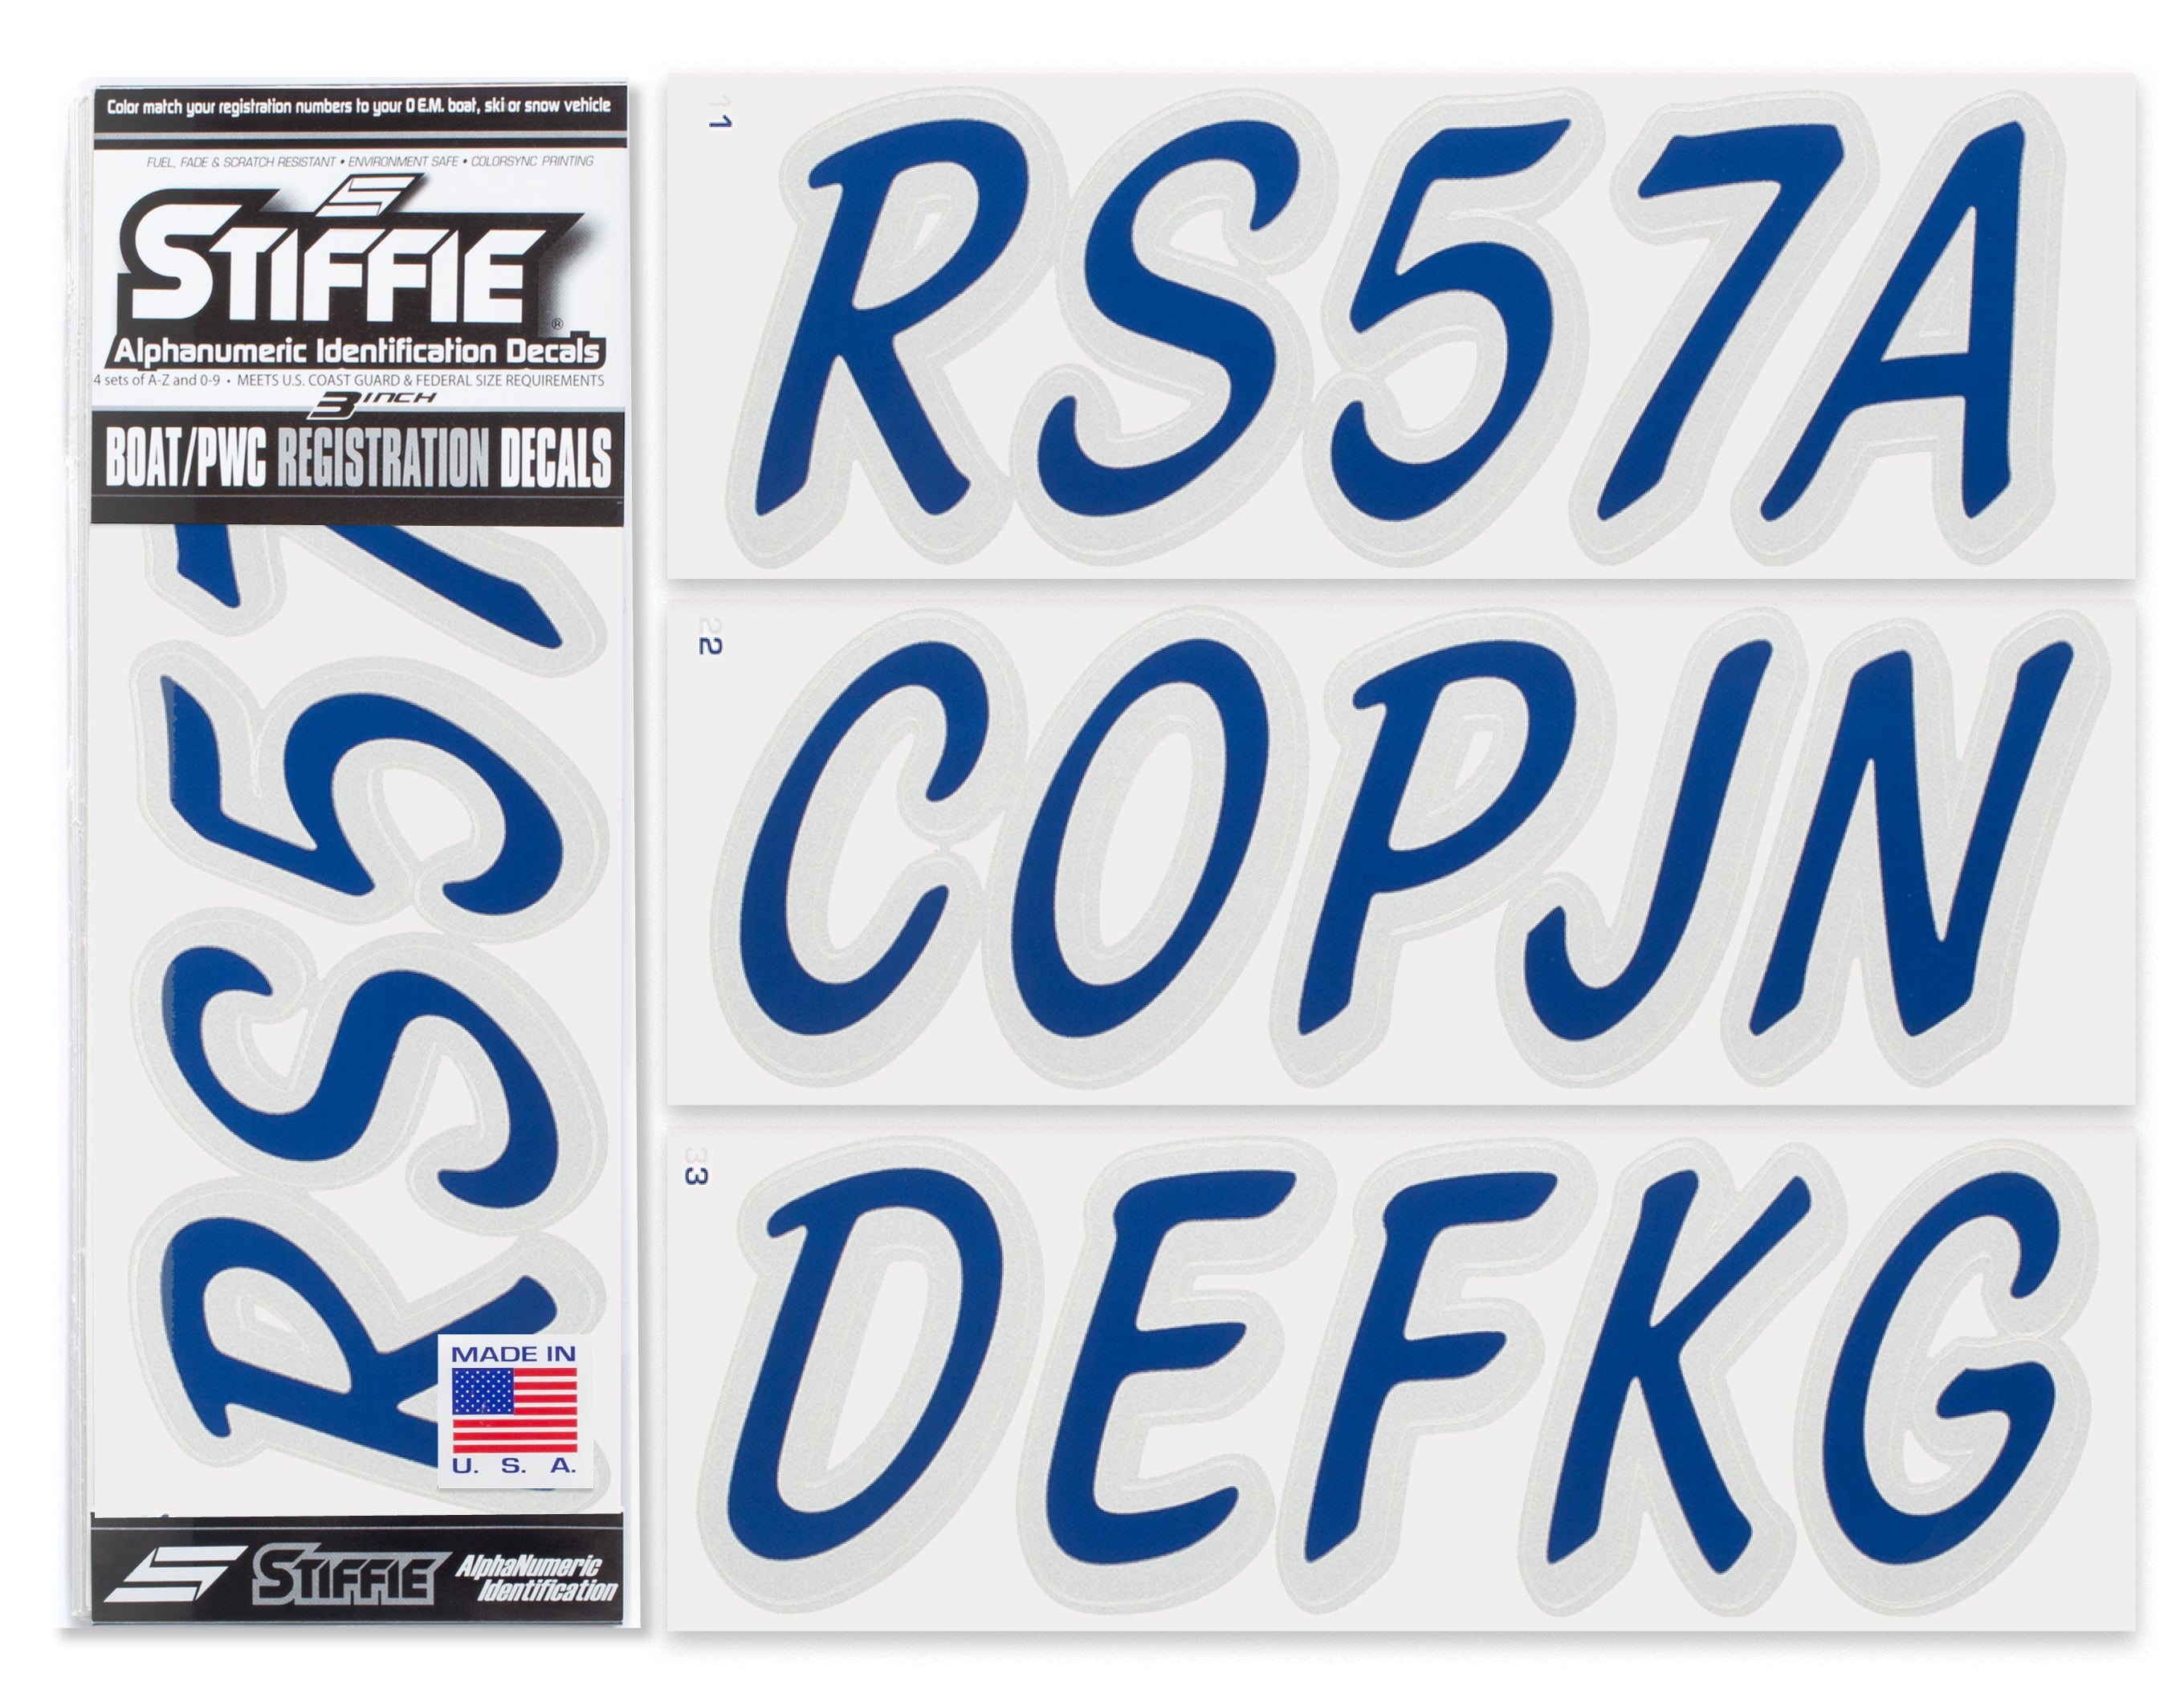 STIFFIE Whipline Solid Navy/Metallic Silver 3" Alpha-Numeric Registration Identification Numbers Stickers Decals for Boats & Personal Watercraft